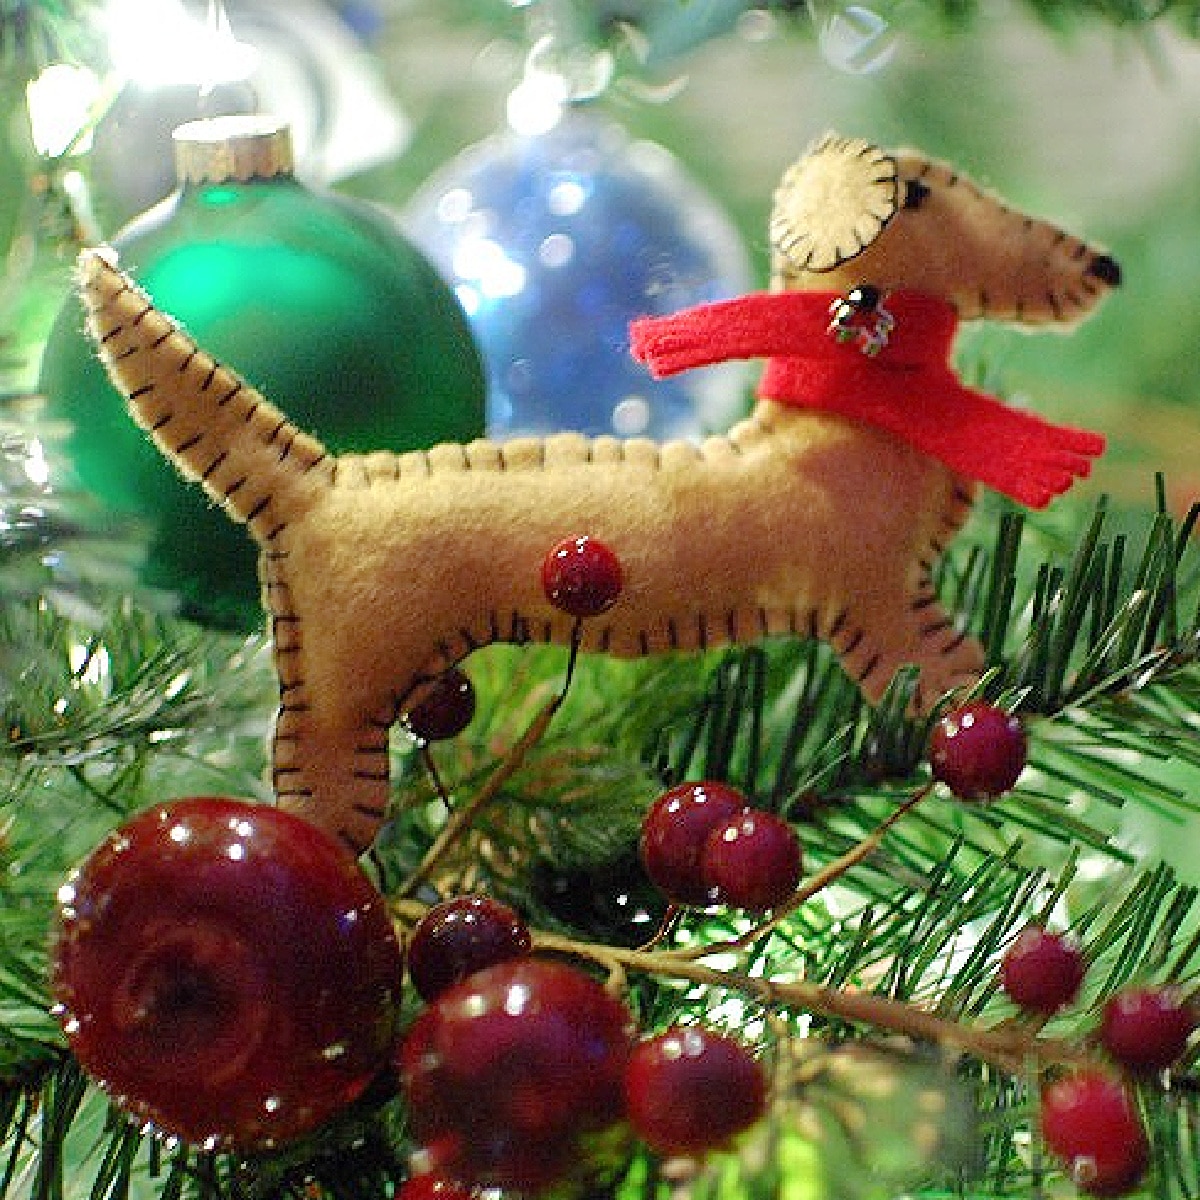 A handmade felt Christmas ornament sewn in the shape of a dachshund dog with a red scarf around the neck. Dachshund ornament is on a holiday tree with other ornaments and berries.